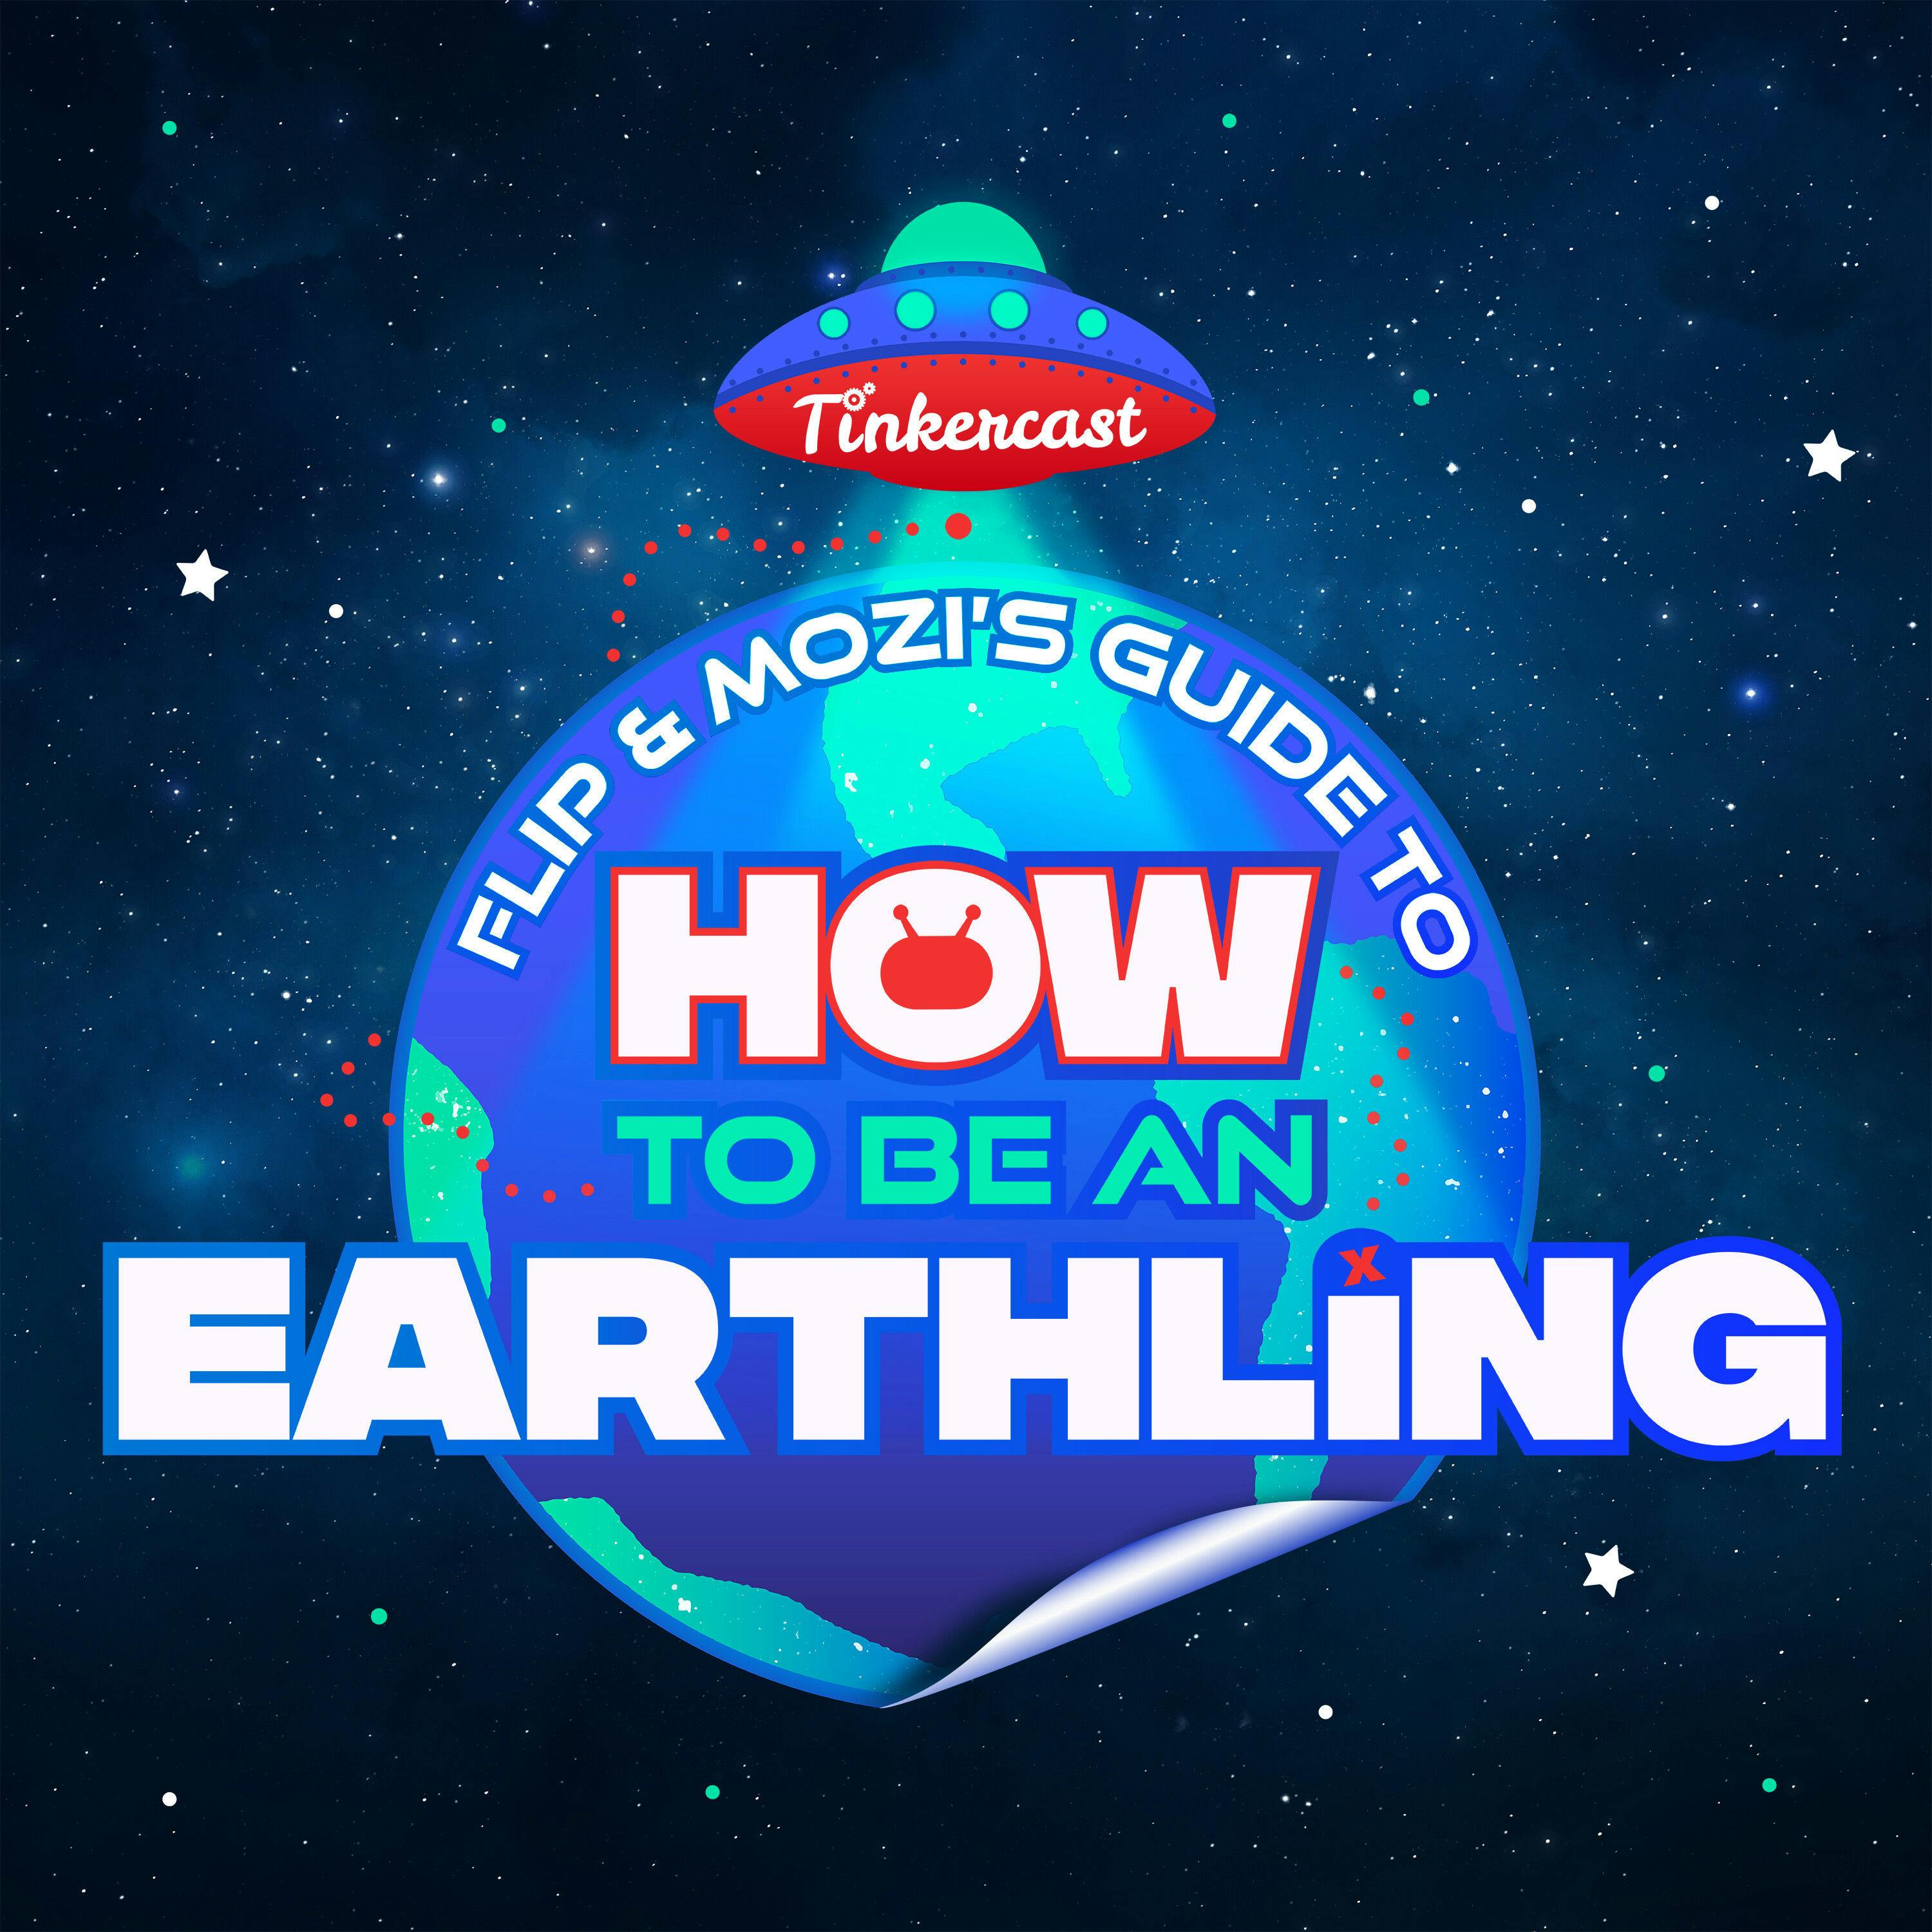 Flip and Mozi’s Guide to How To Be an Earthling